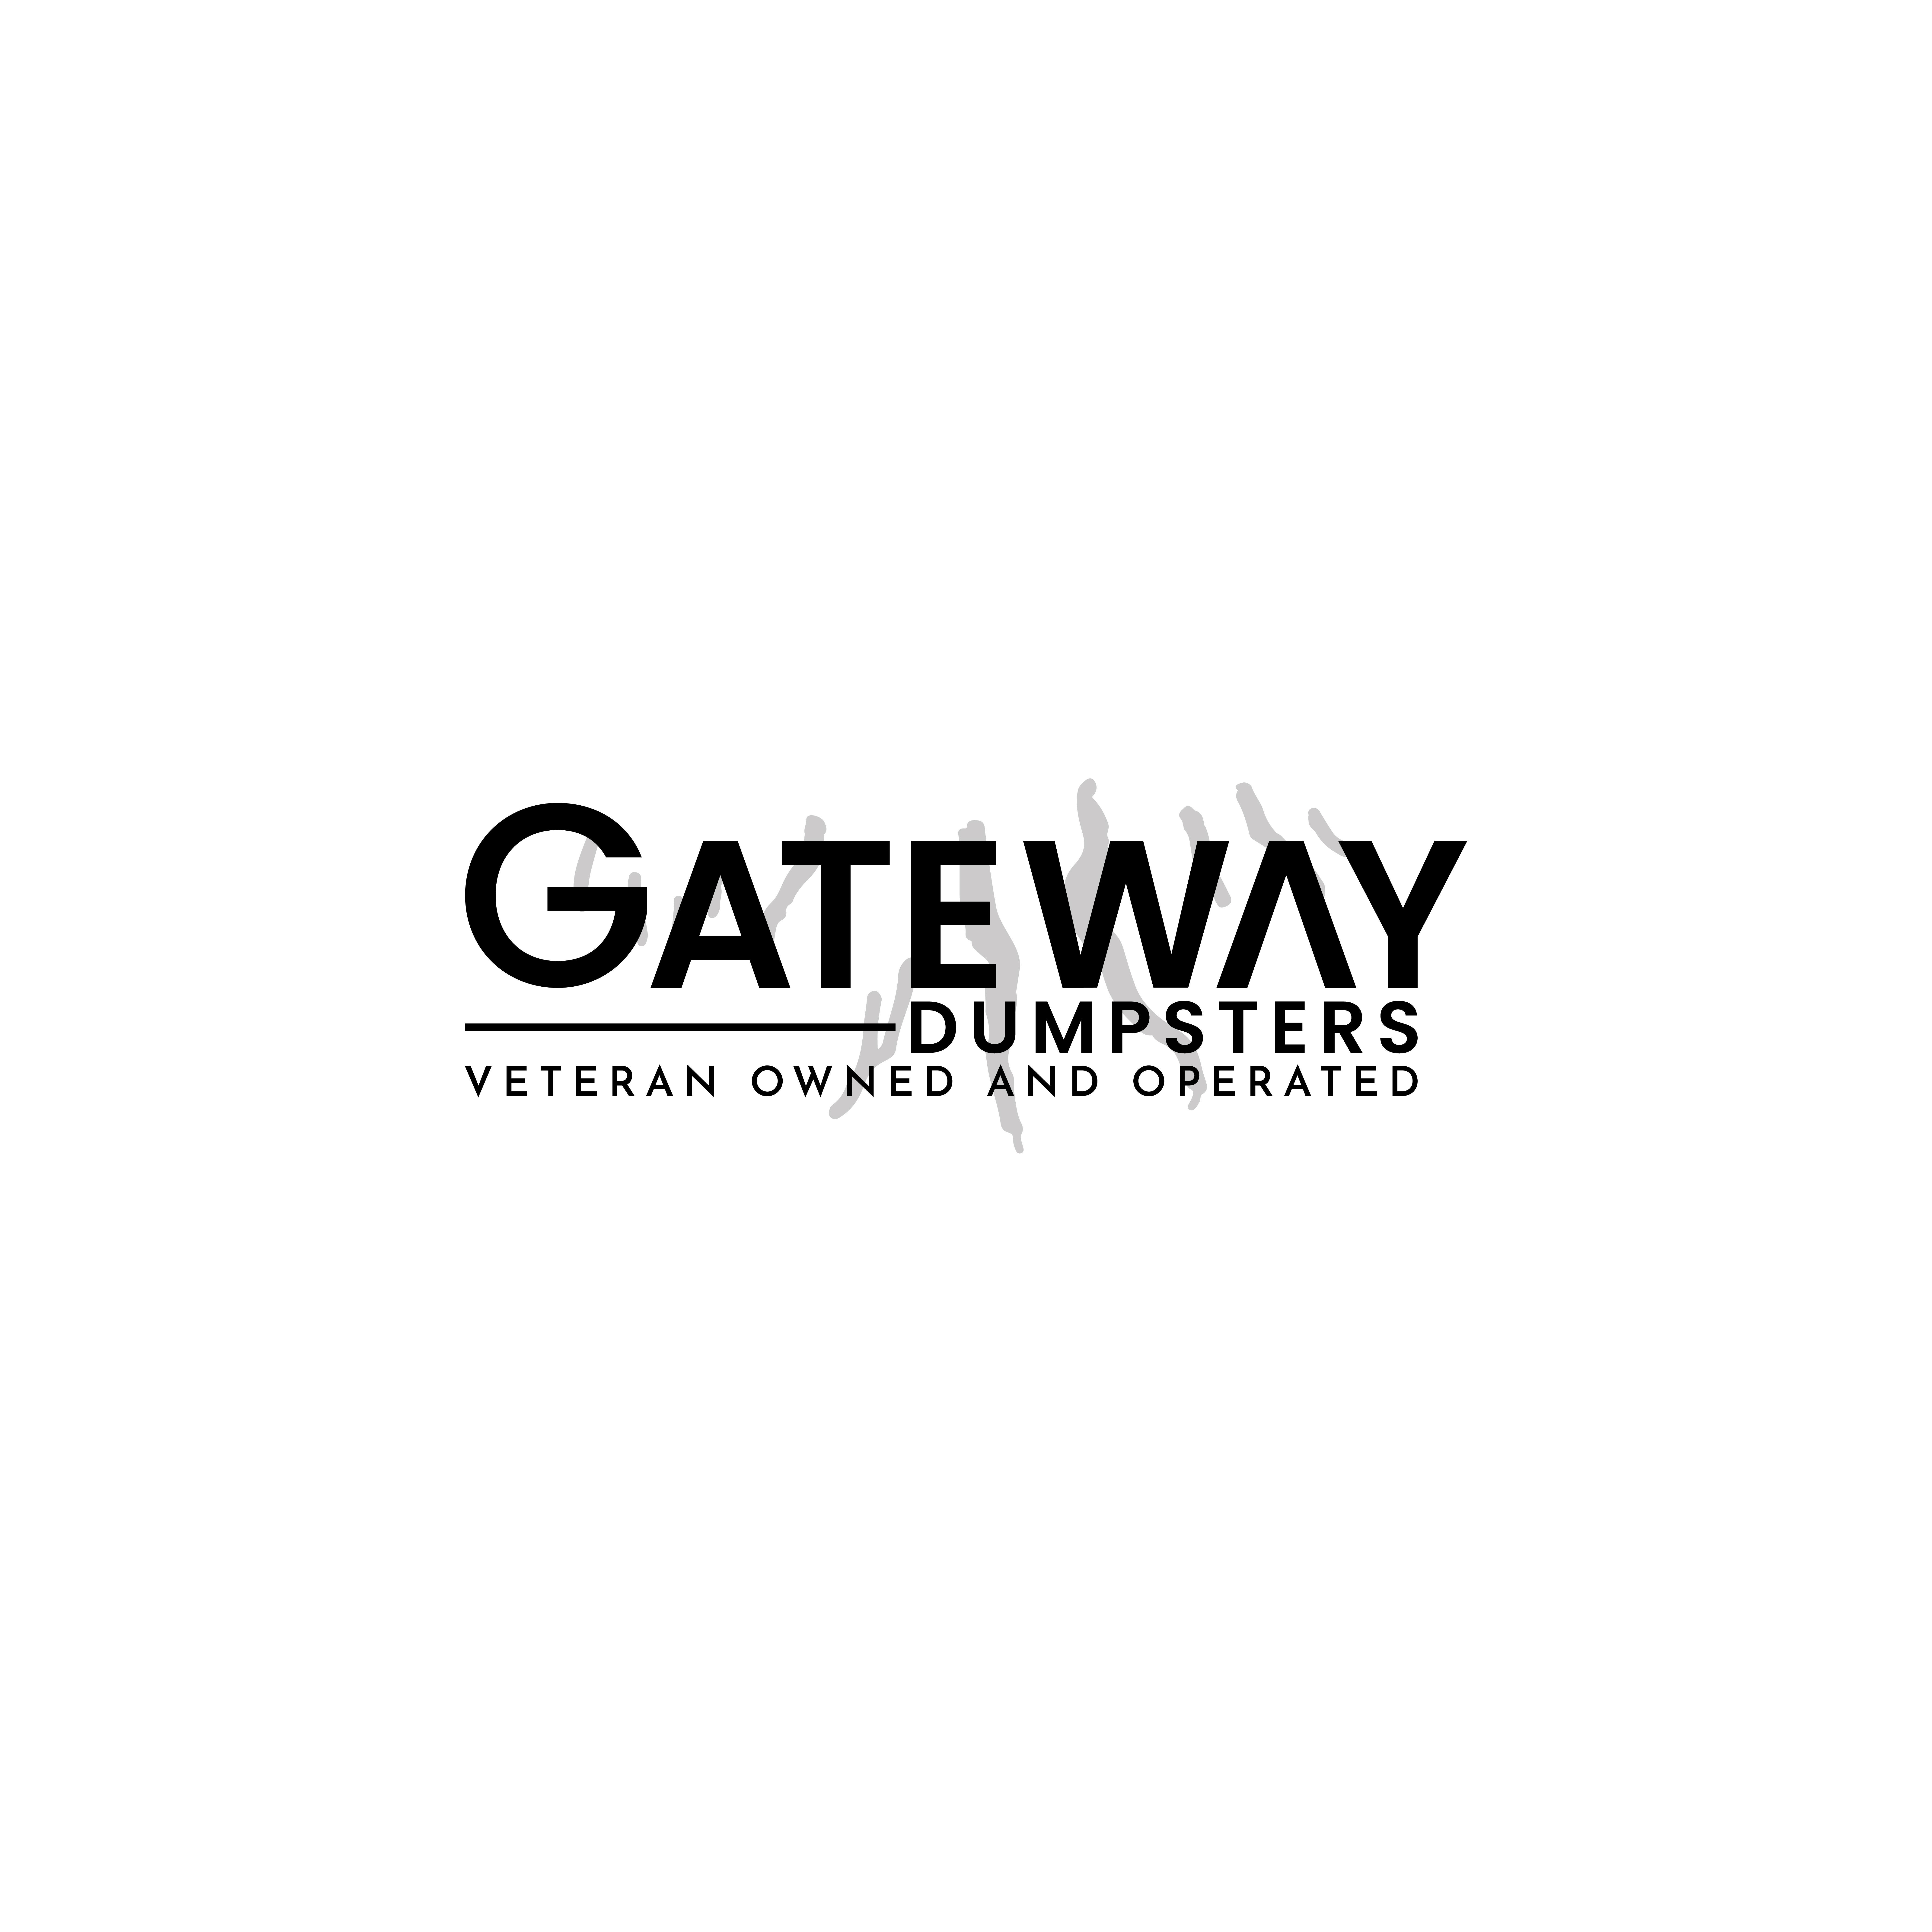 Gateway Dumpsters - Rochester, NY 14623 - (585)270-1757 | ShowMeLocal.com